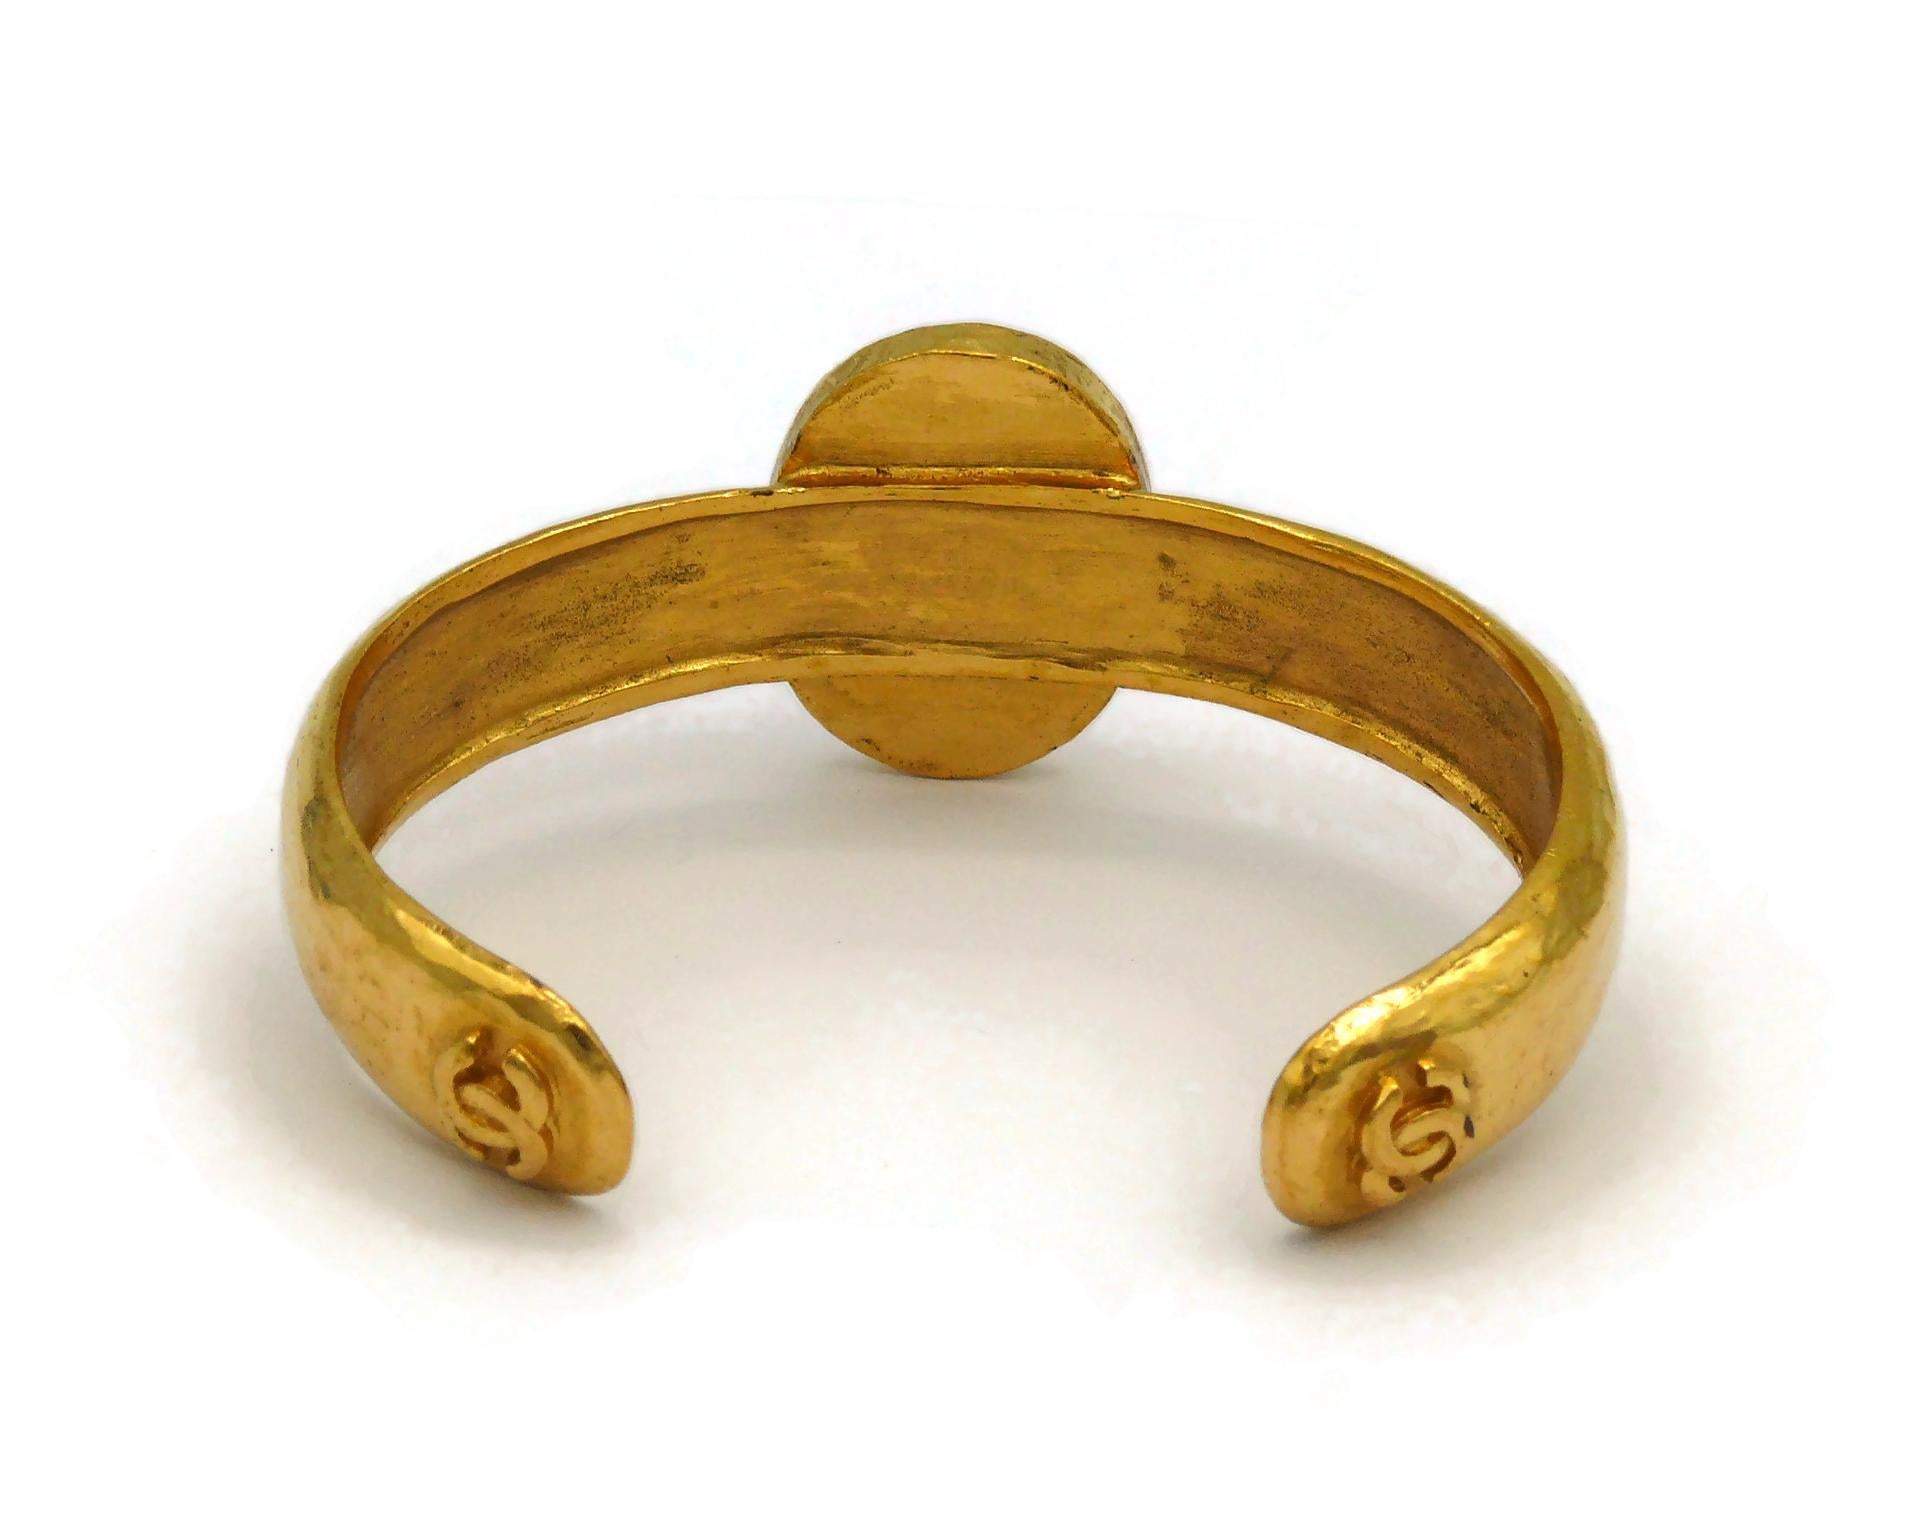 CHANEL by KARL LAGERFELD Vintage Gold Tone Blue Stone Bangle Bracelet, Fall 1996 For Sale 4